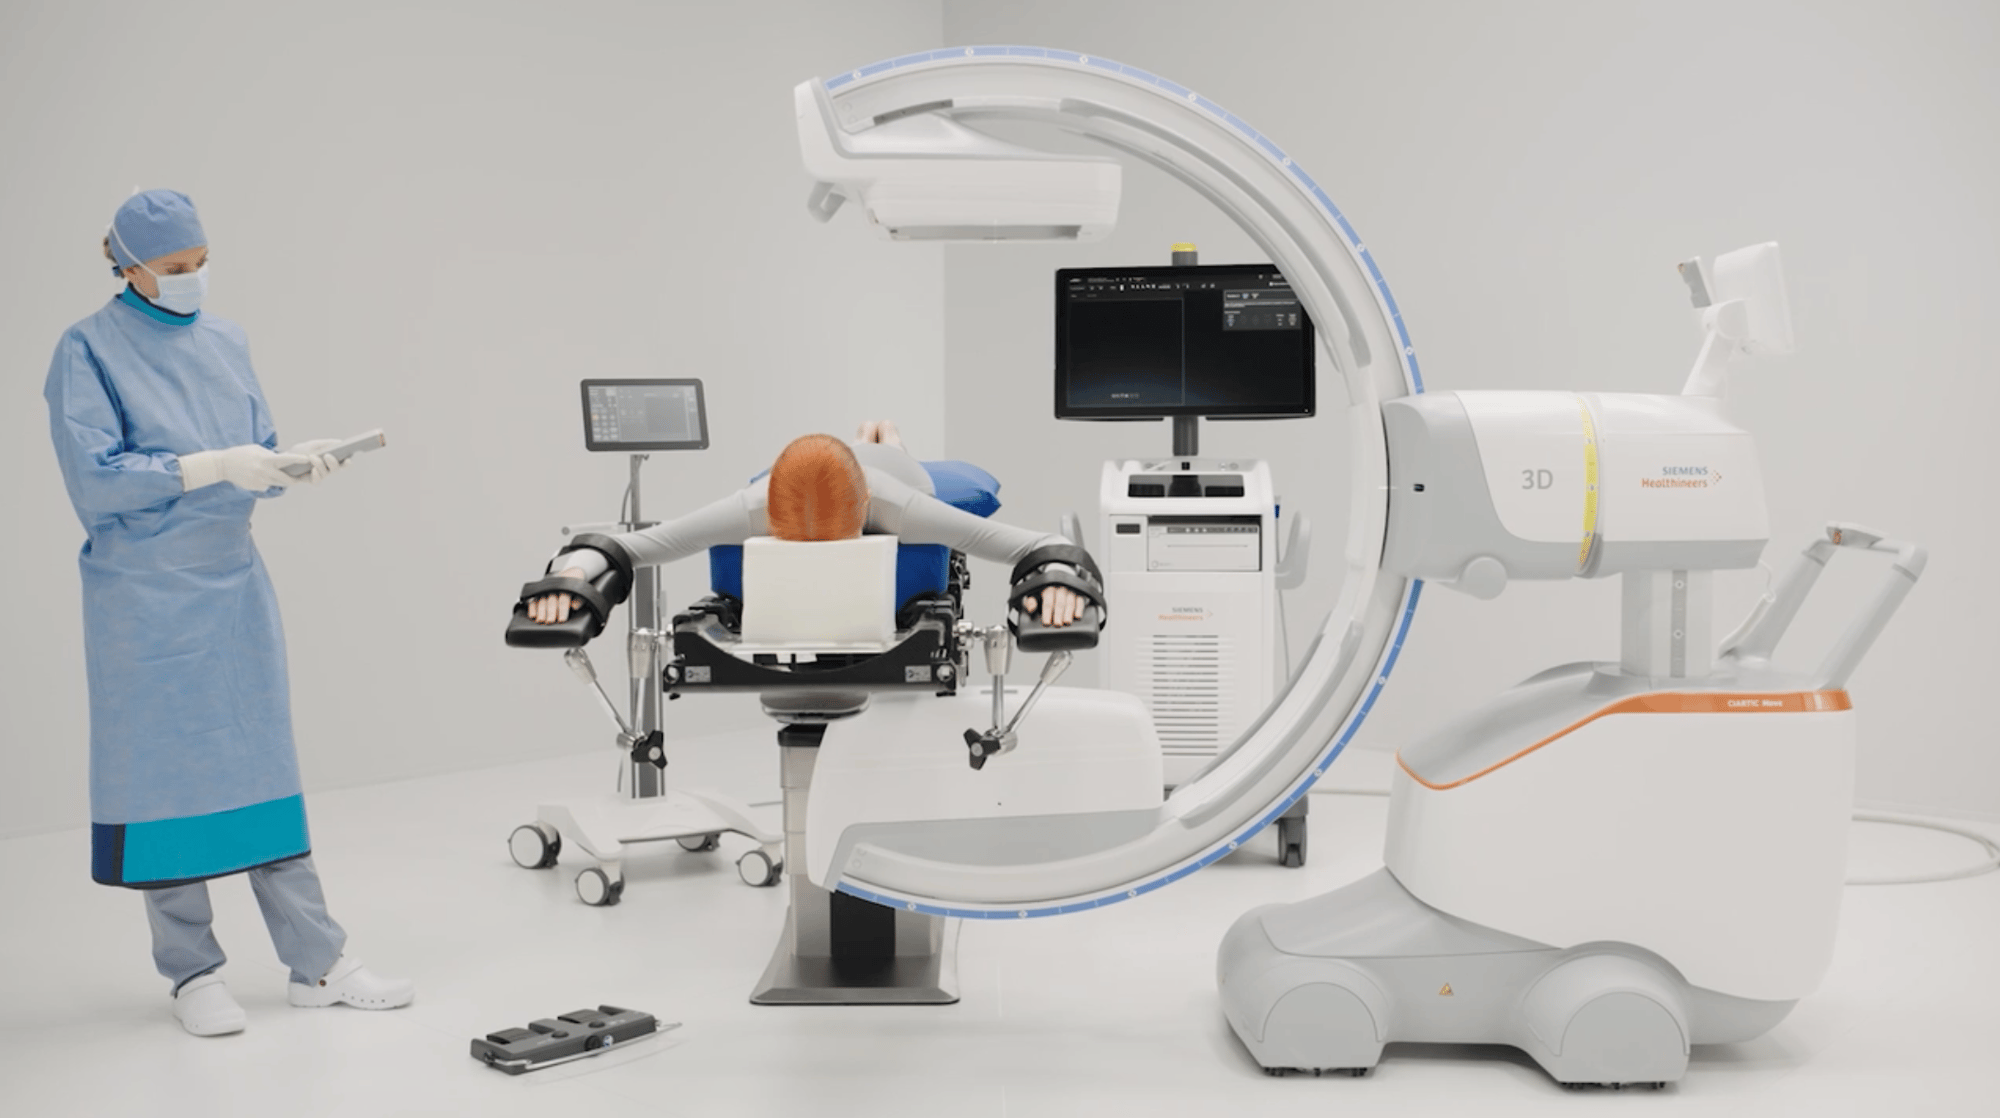 siemens-healthineers_AT_-Mobile-C-arm-machine_CIARTIC-Move_automated-workflows